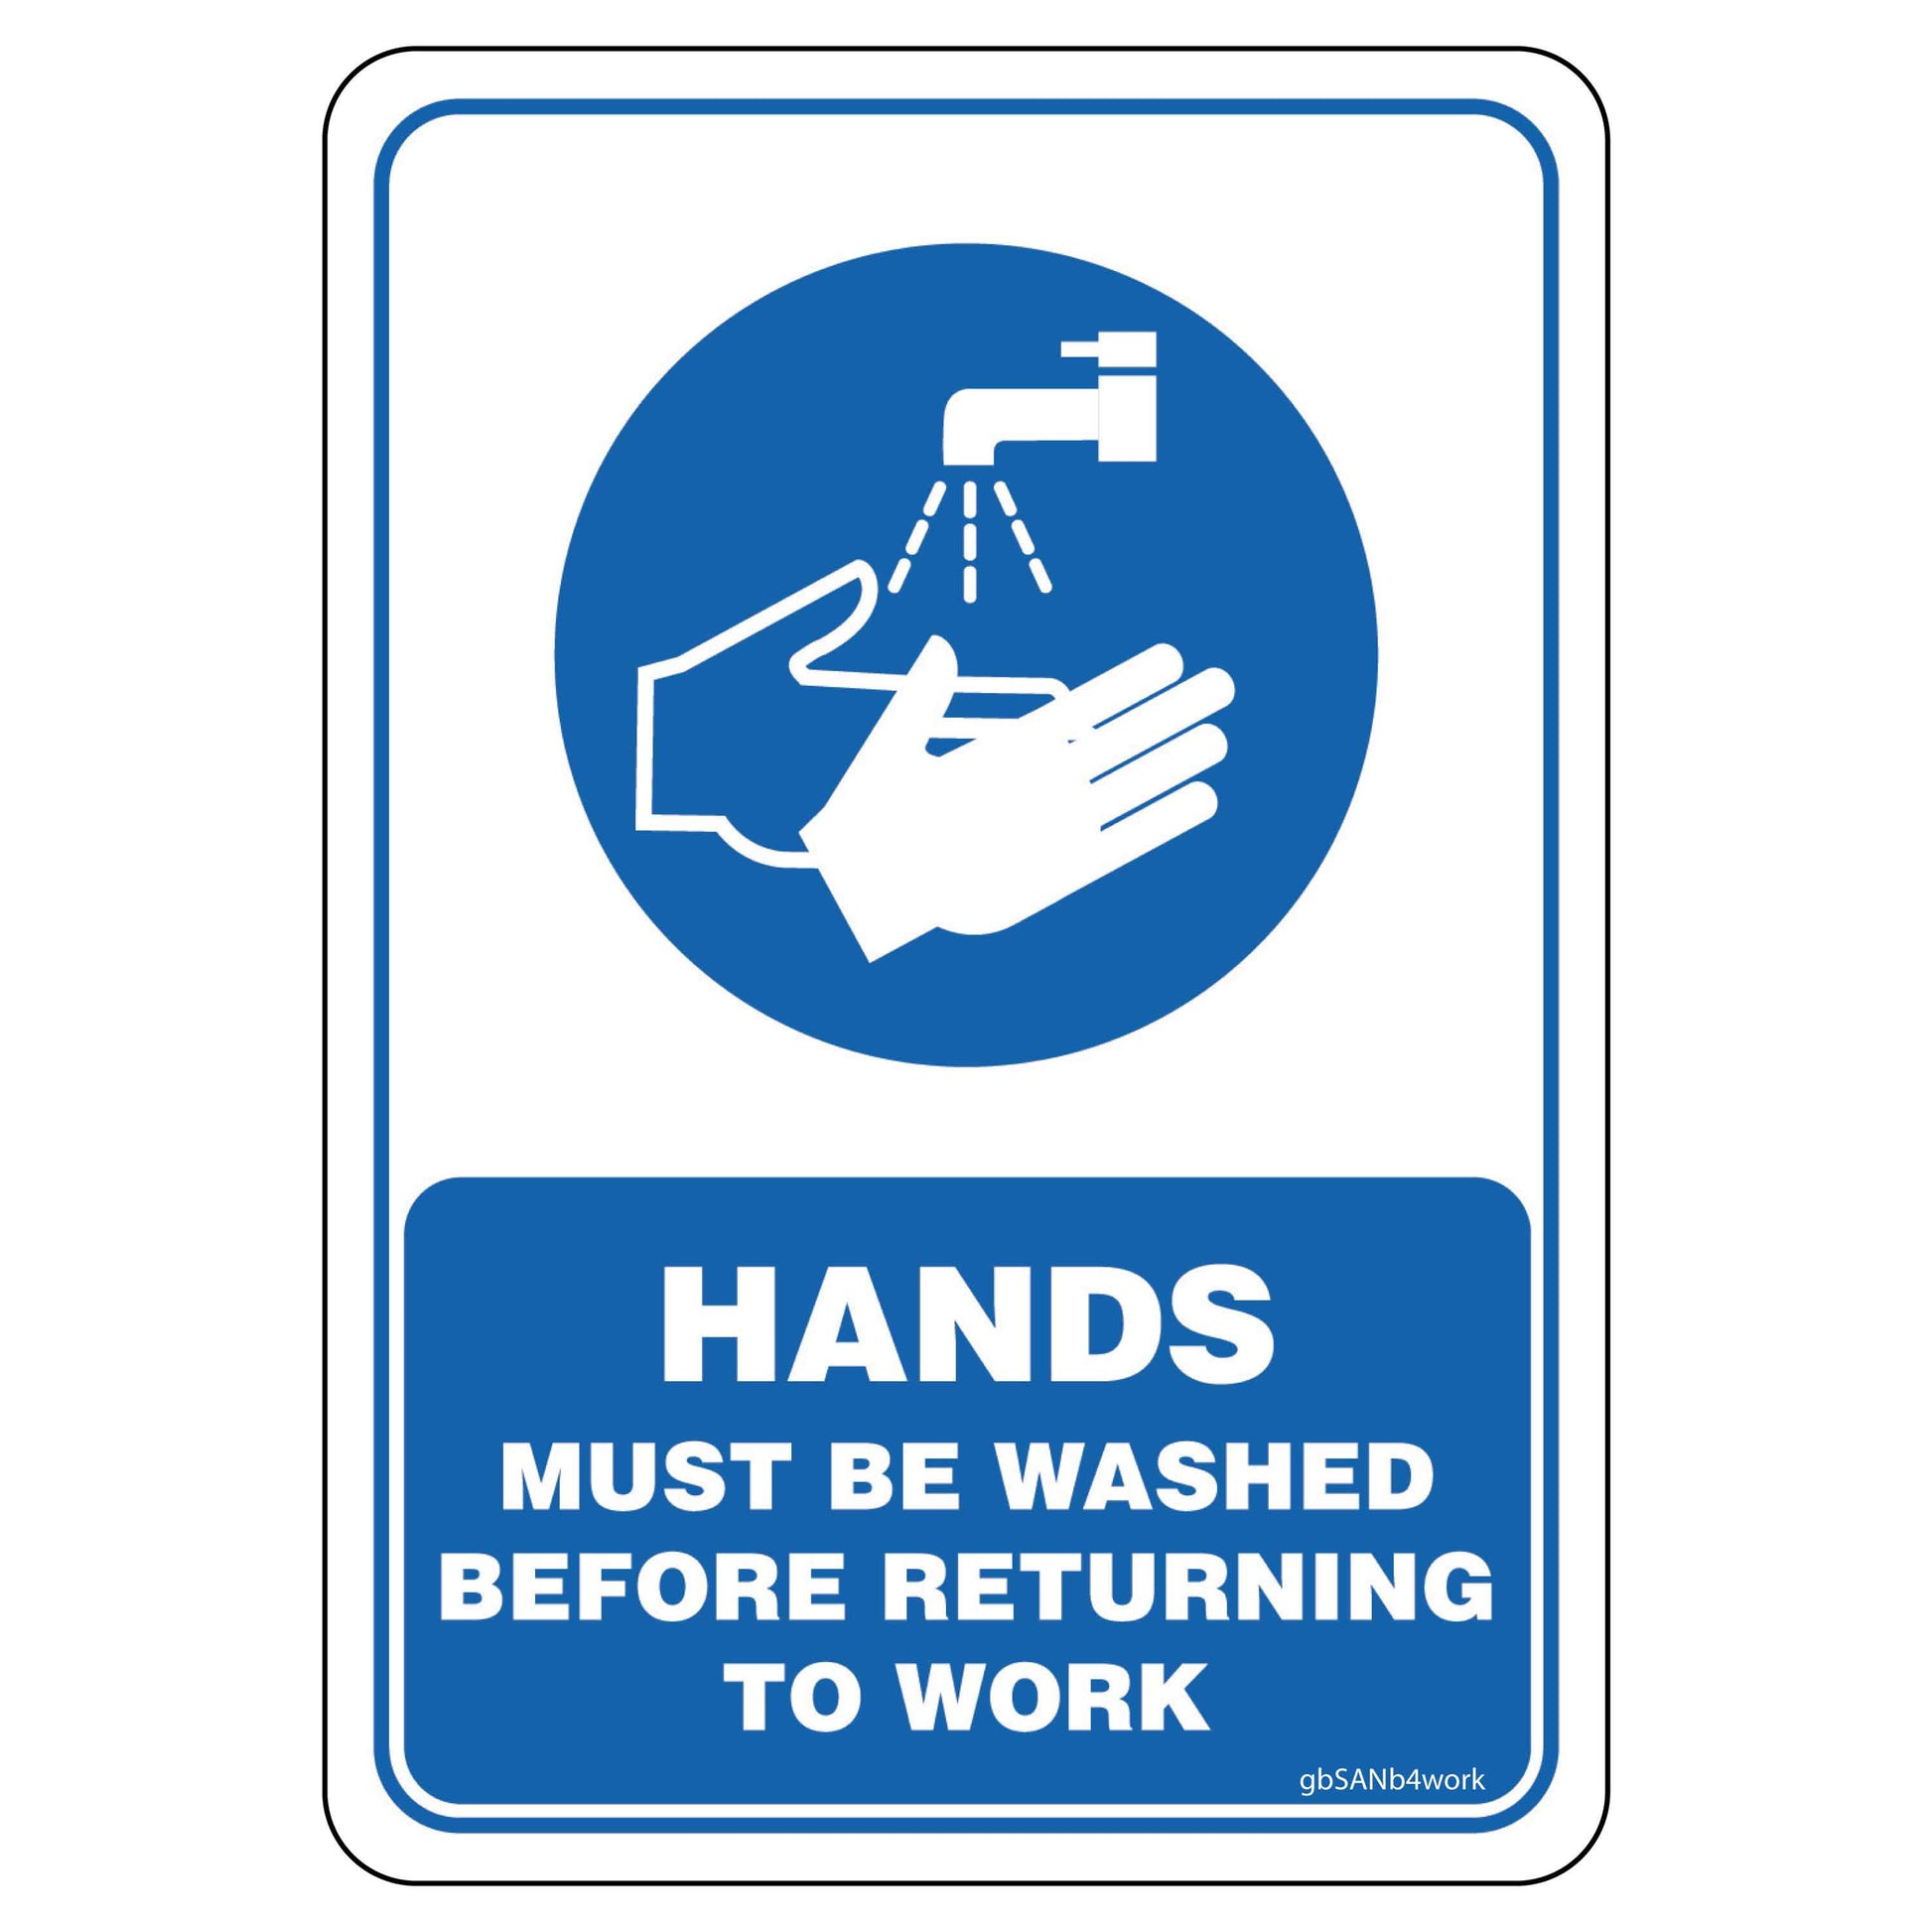 Wash Hands Before Starting Work Decal. 3.5 inches by 5 inches in size. 